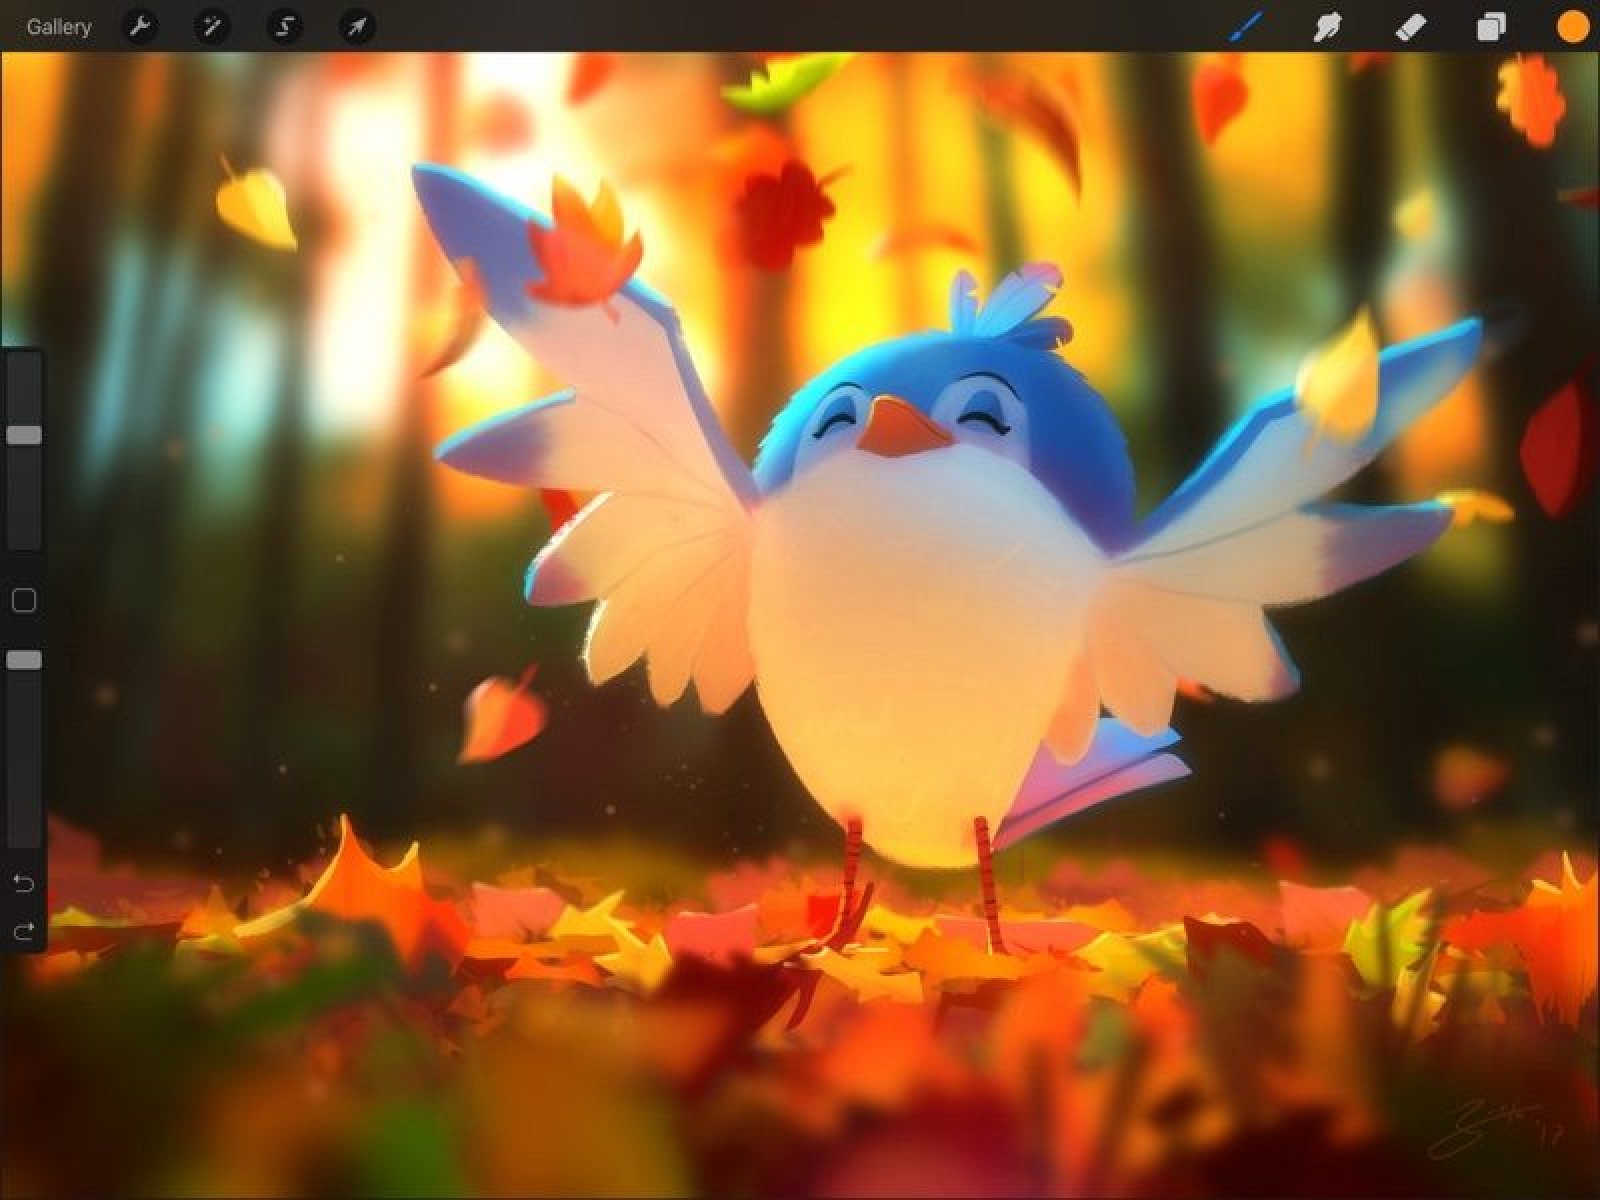 Procreate 4 for iPad Offers New Painting Engine Layer 